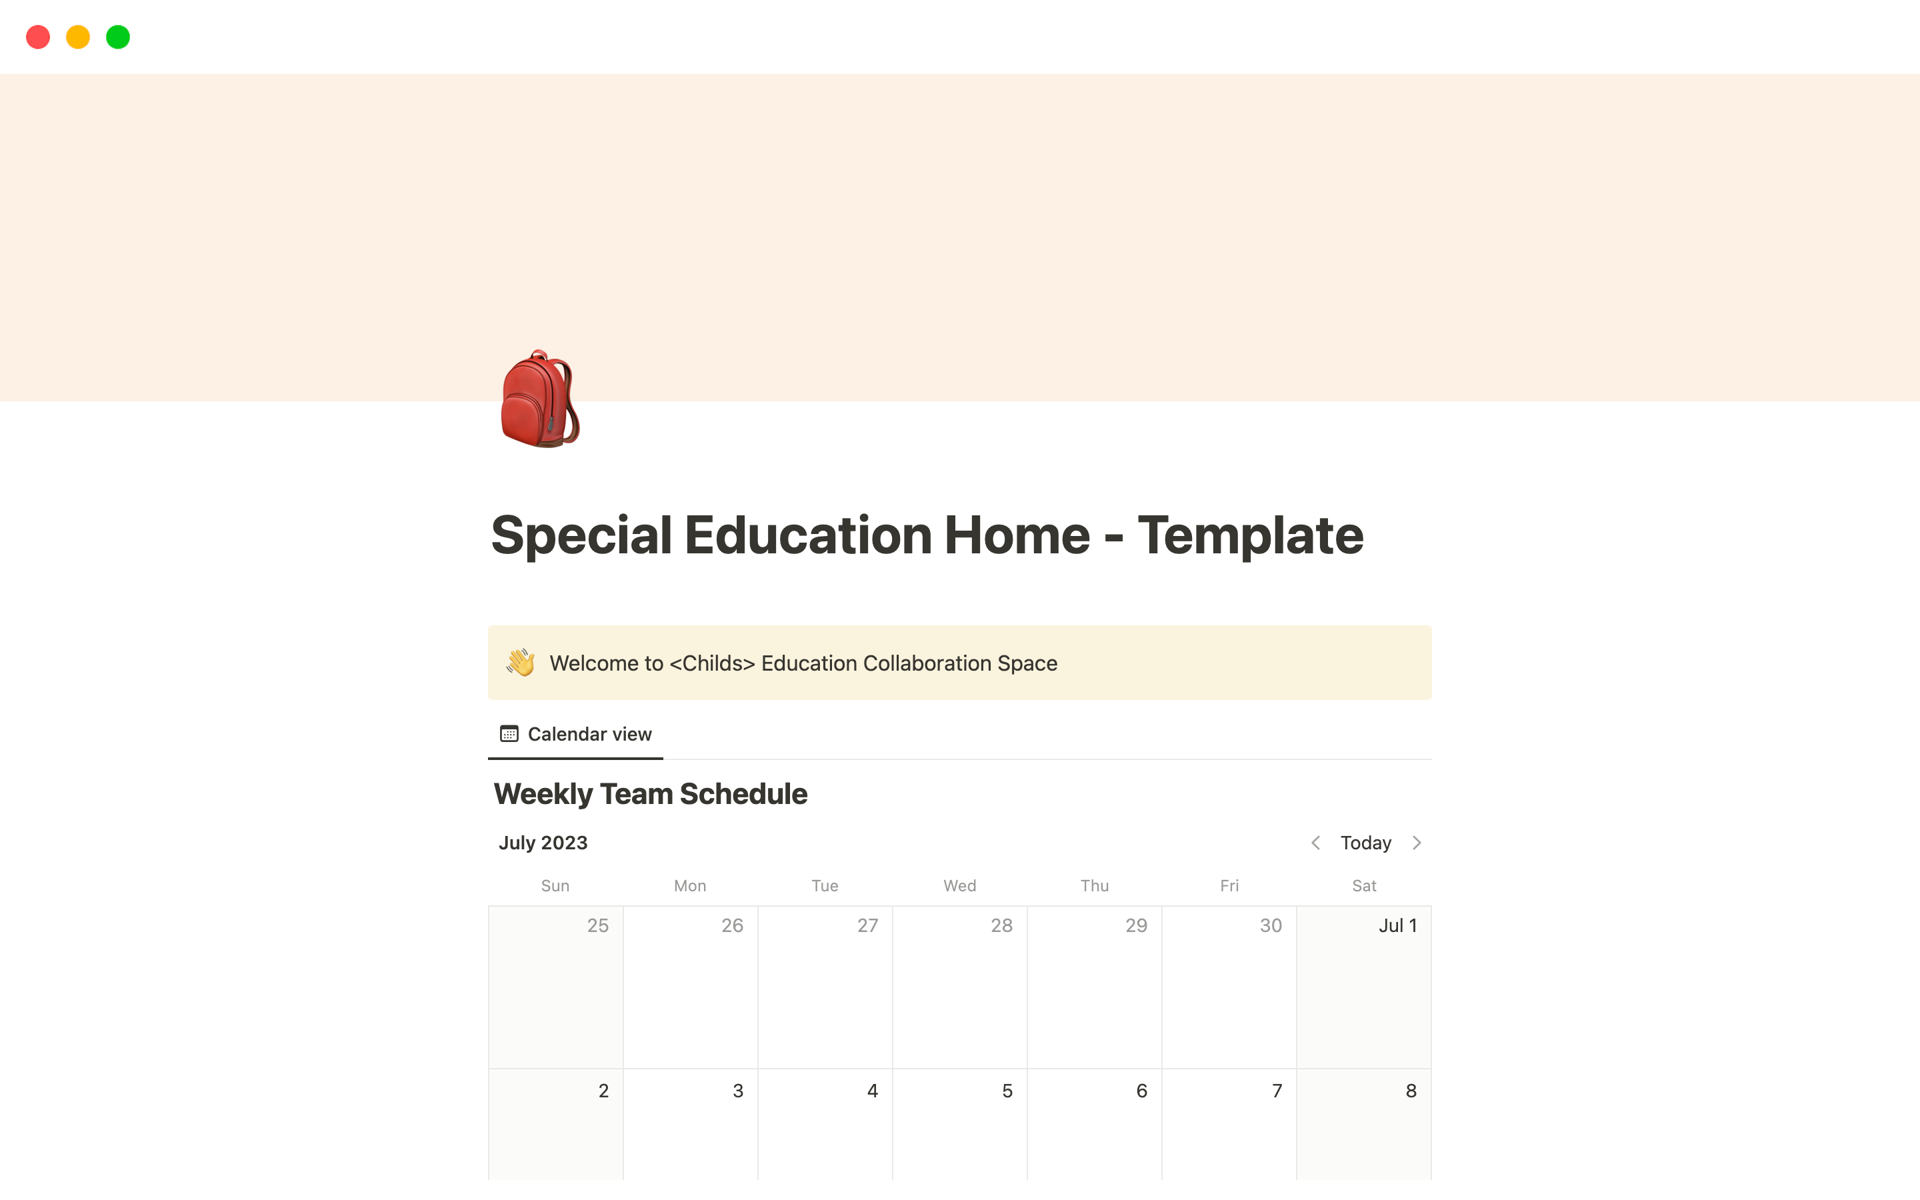 Special Education Home - Template のテンプレートのプレビュー